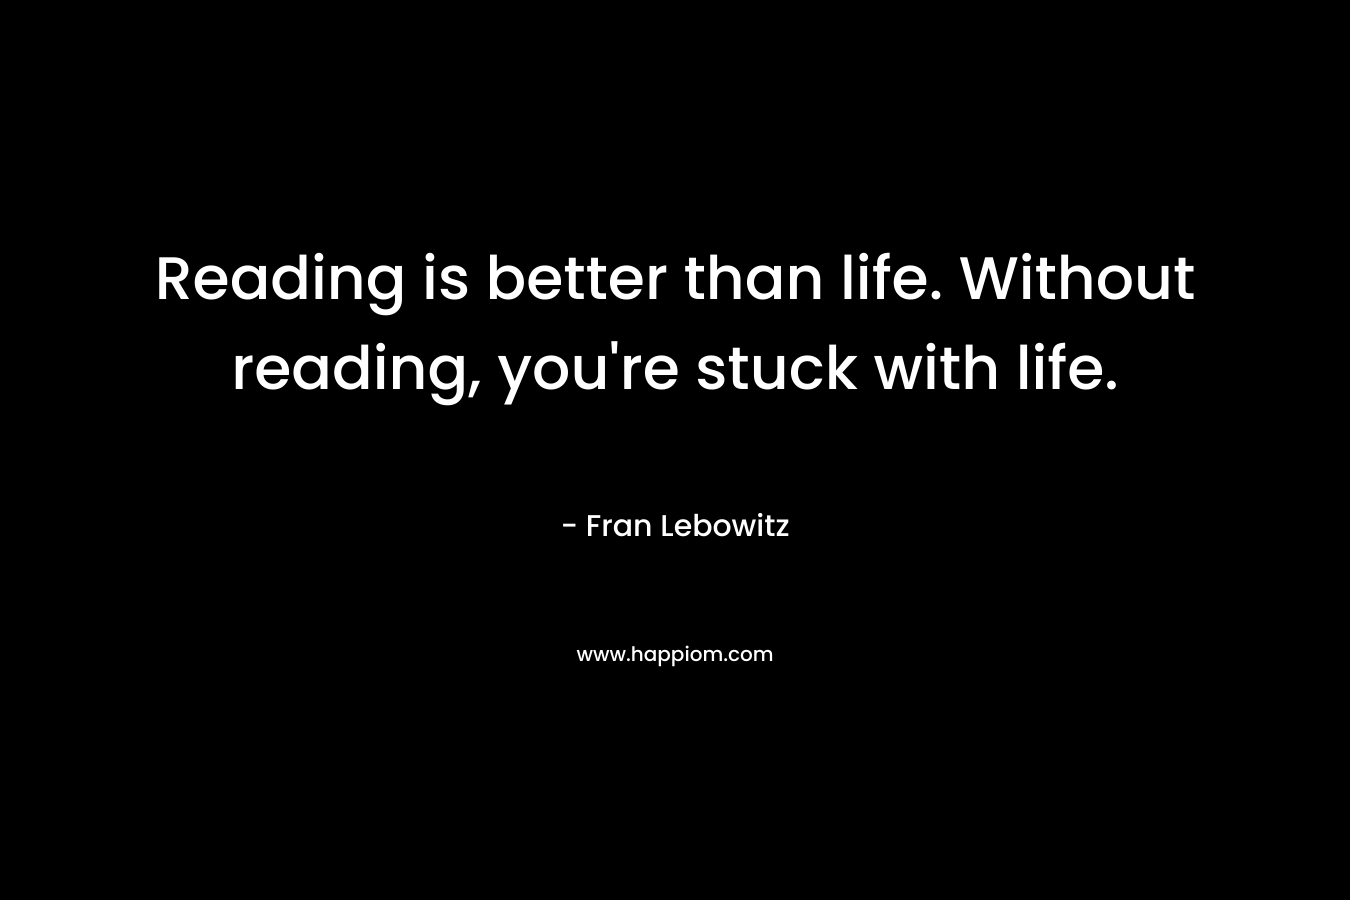 Reading is better than life. Without reading, you're stuck with life.